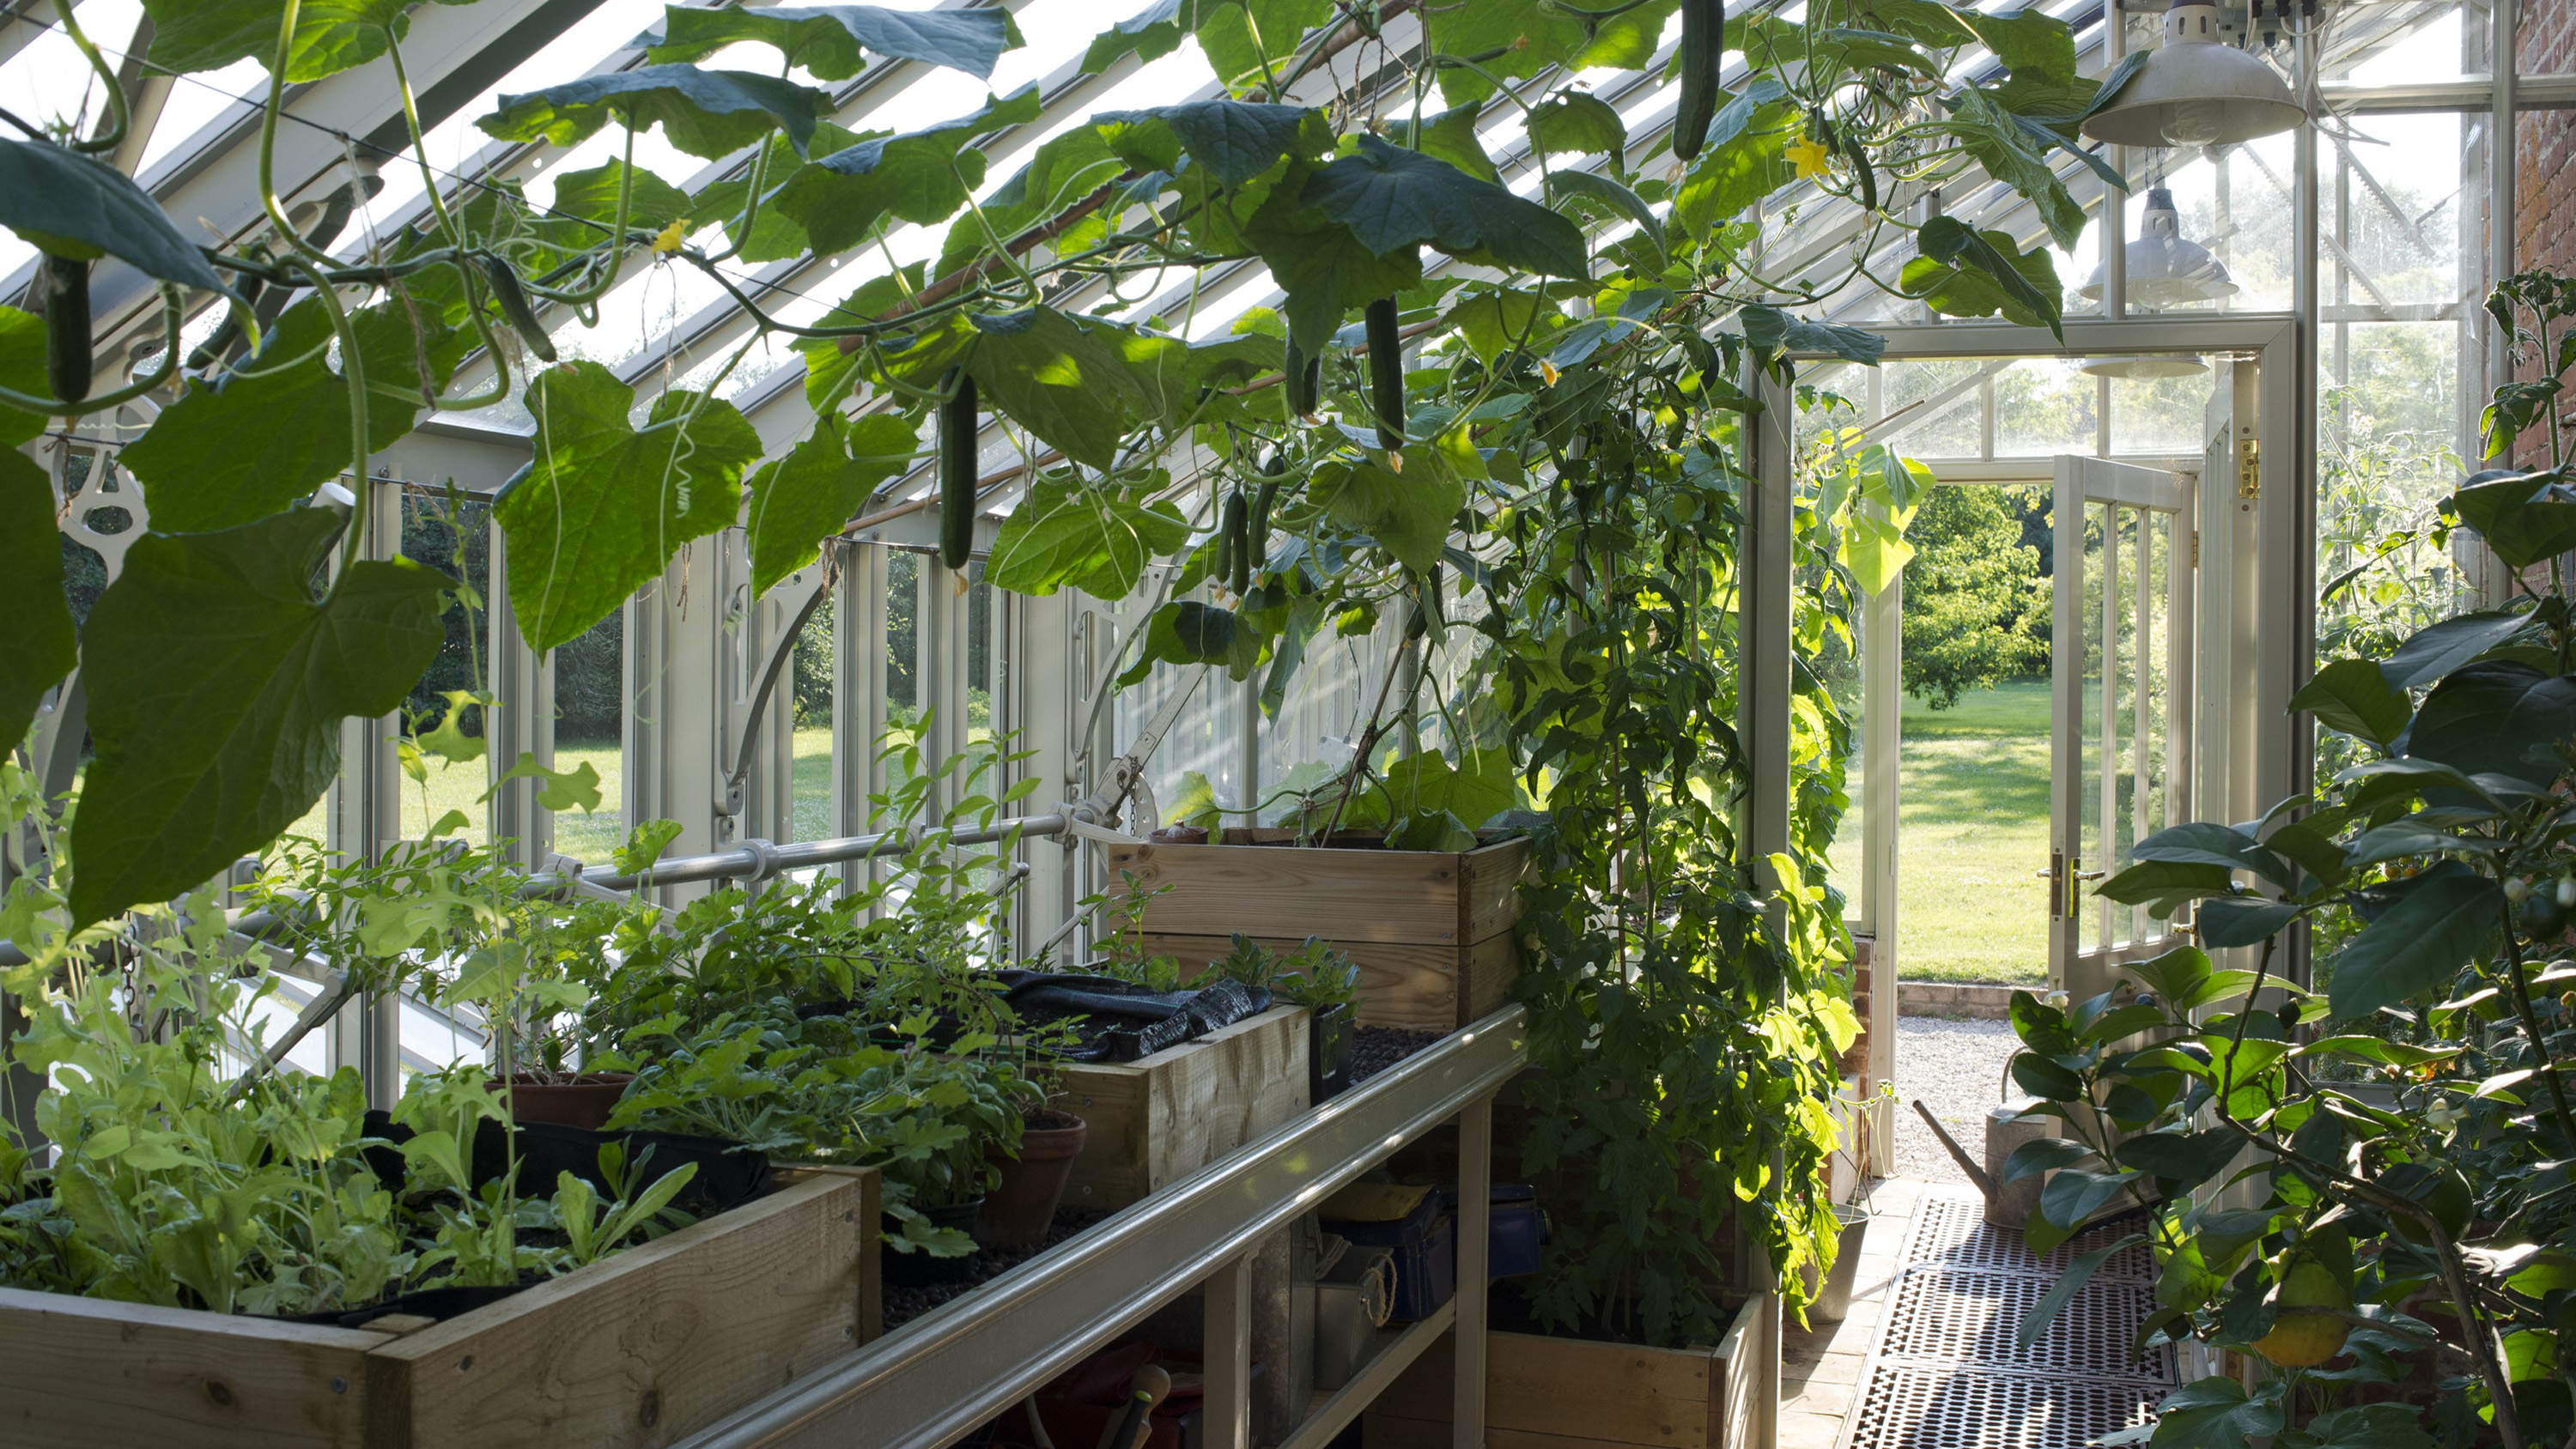 Greenhouses contend with the climate to keep plants growing